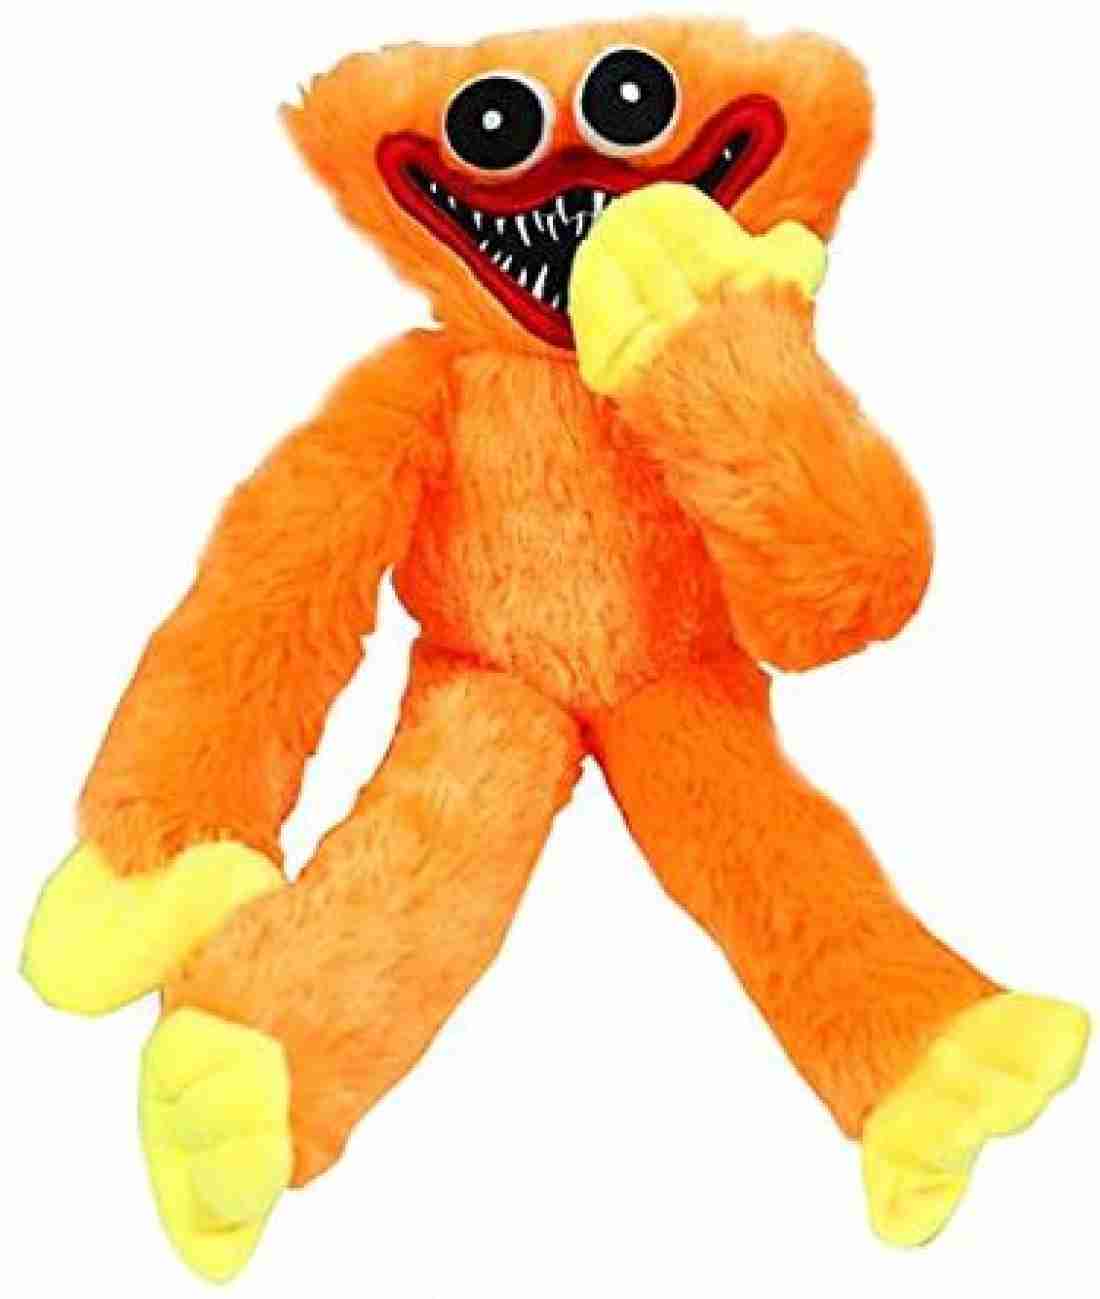 TechMax Solution Rainbow Friends Orange - 12 inch - Rainbow Friends Orange  . Buy Rainbow Friends Orange toys in India. shop for TechMax Solution  products in India.